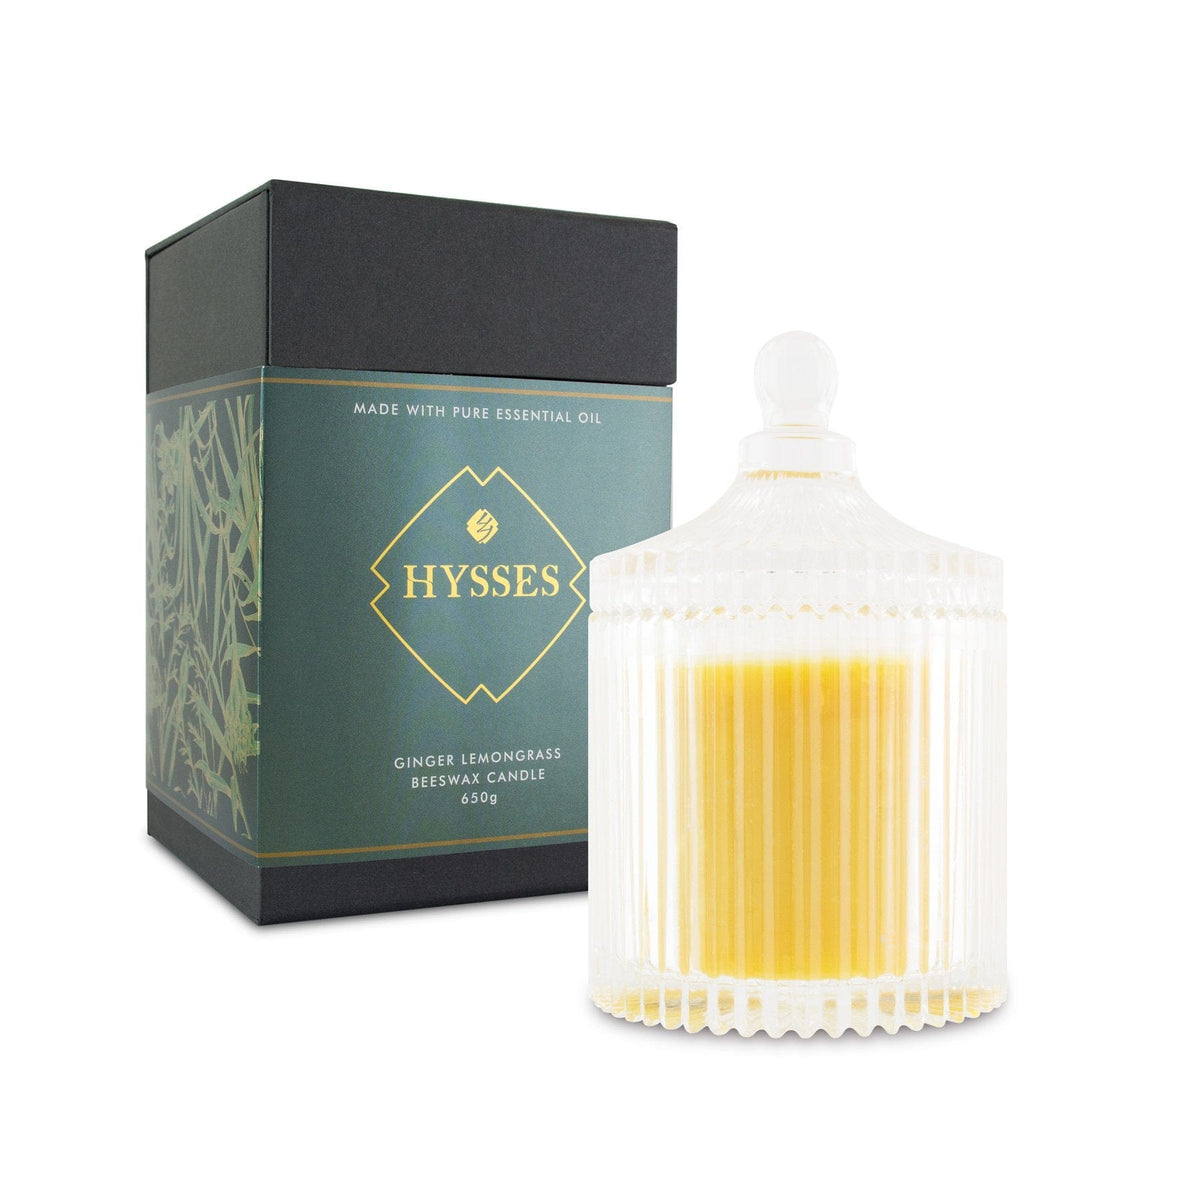 Hysses Home Scents 650g Beeswax Candle Ginger Lemongrass